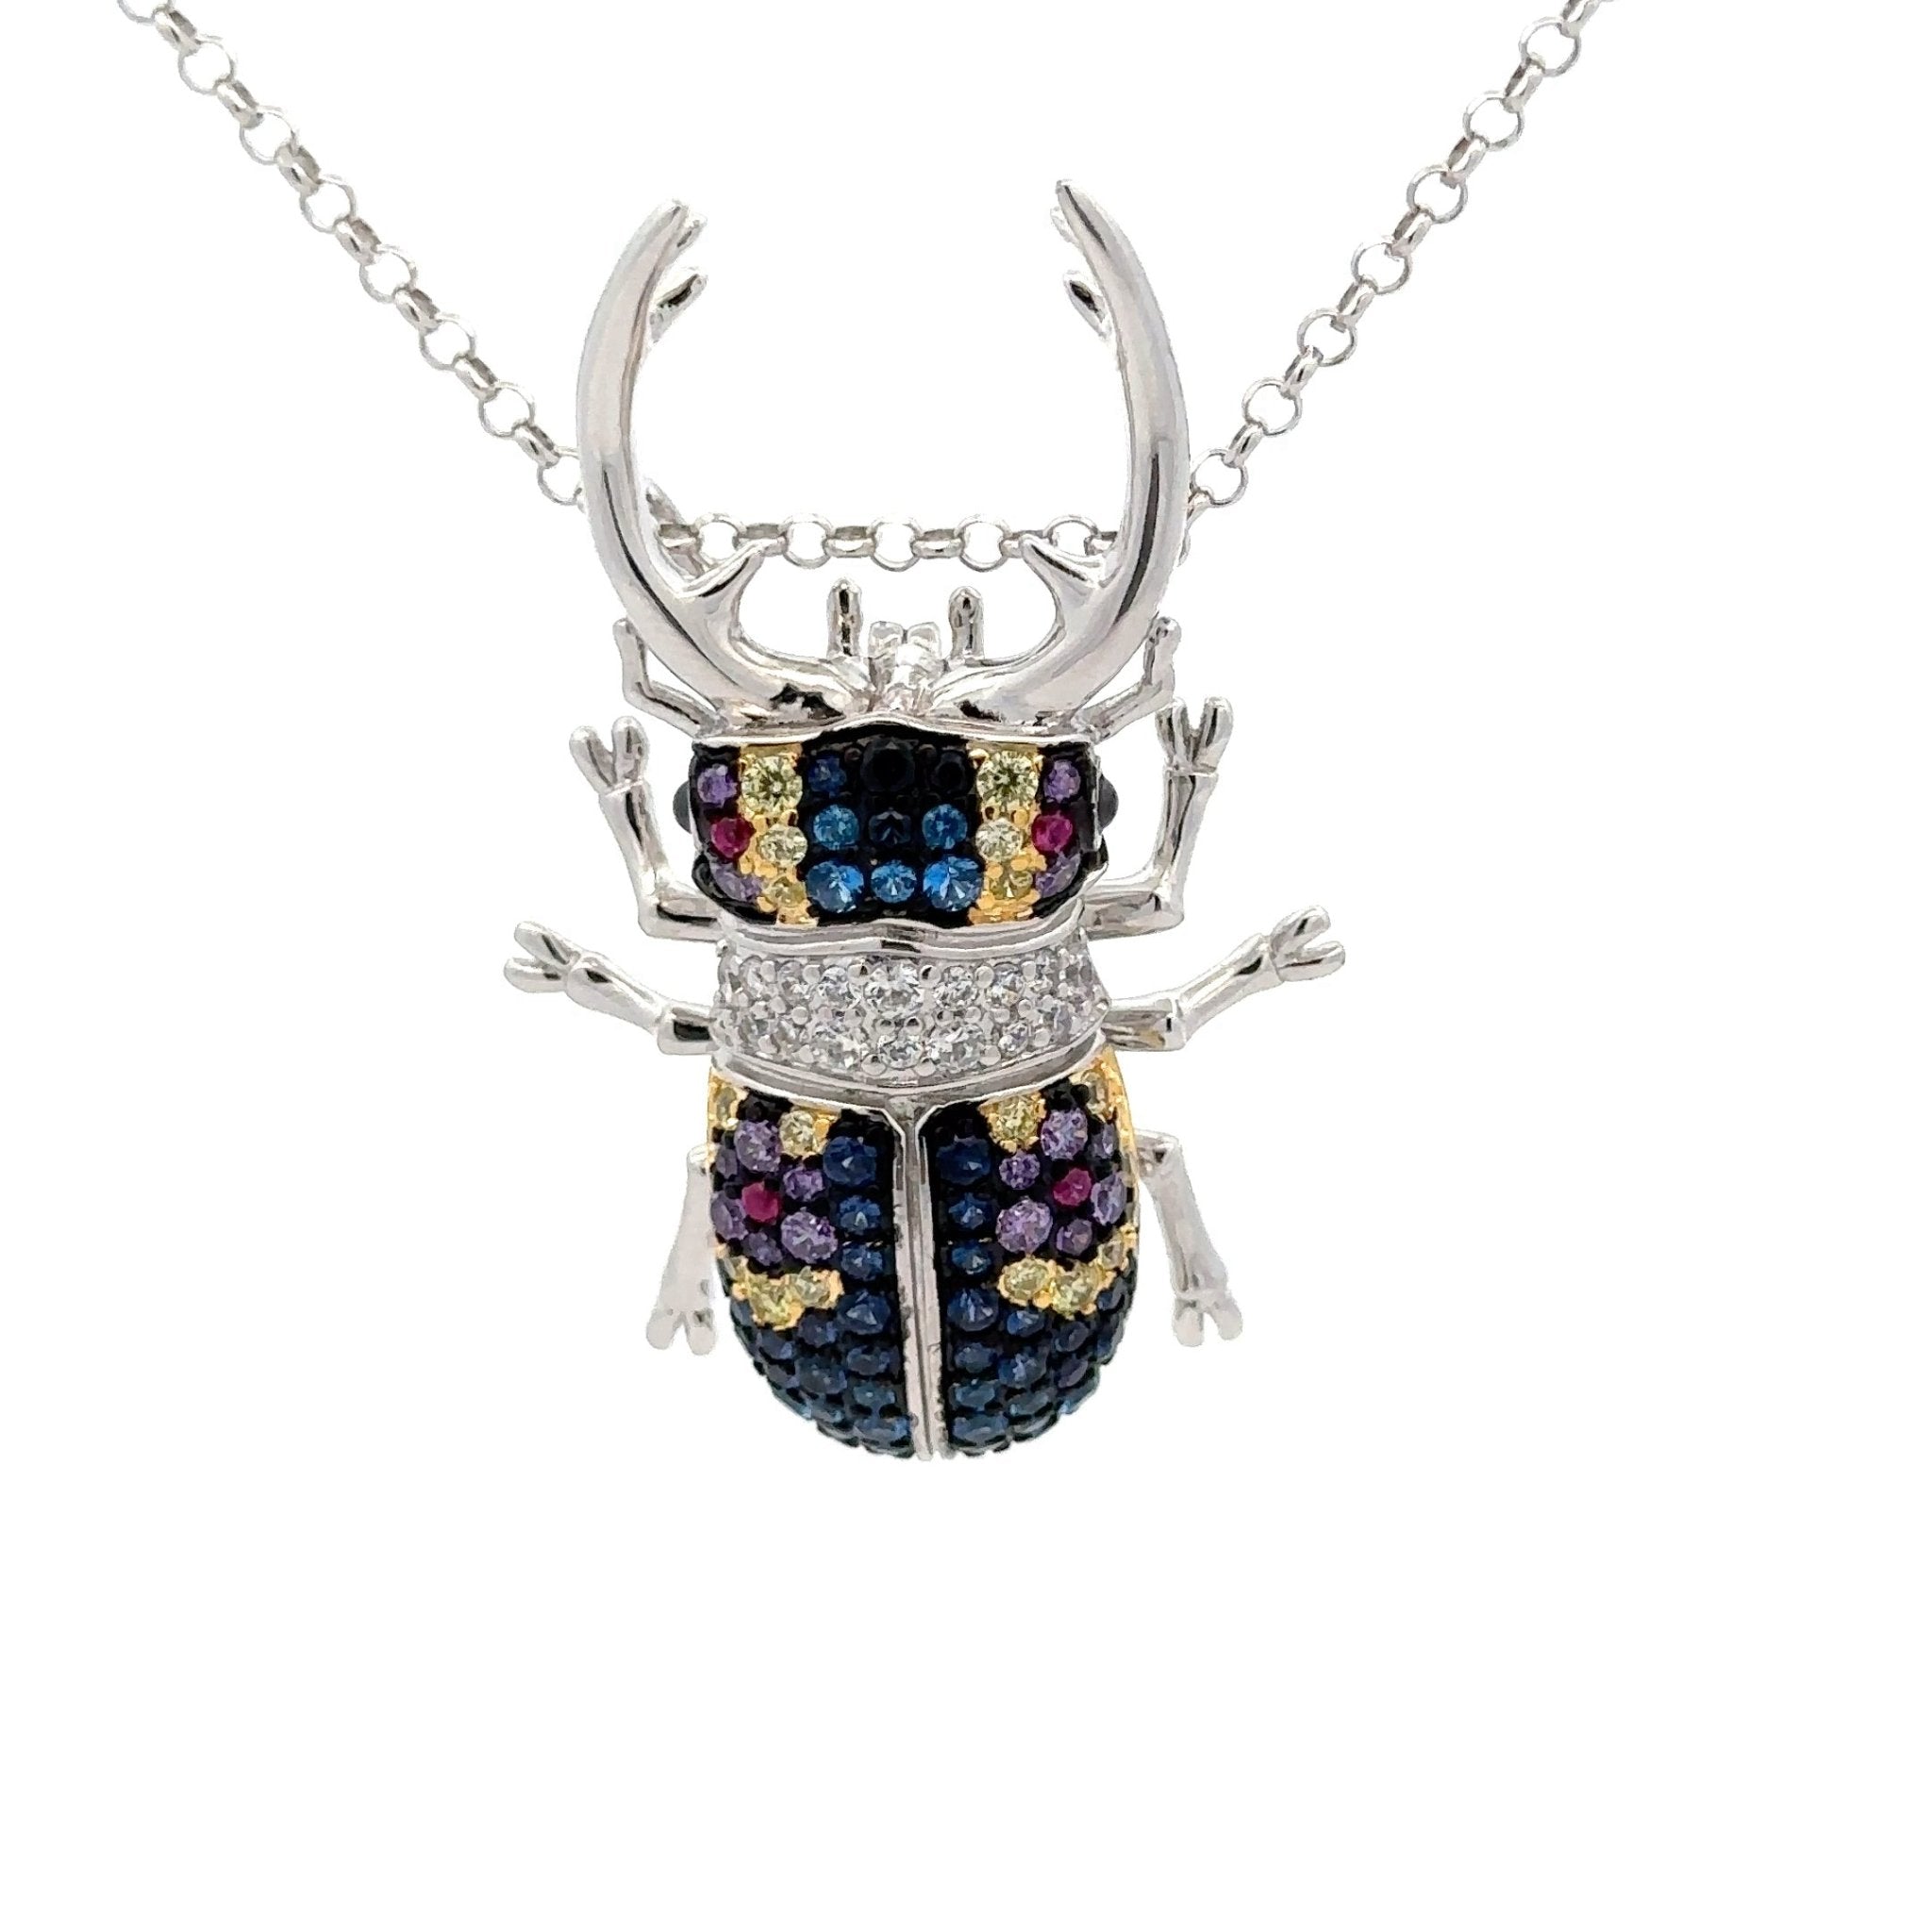 Multicolor Stag Beetle Silver Brooch by Natkina